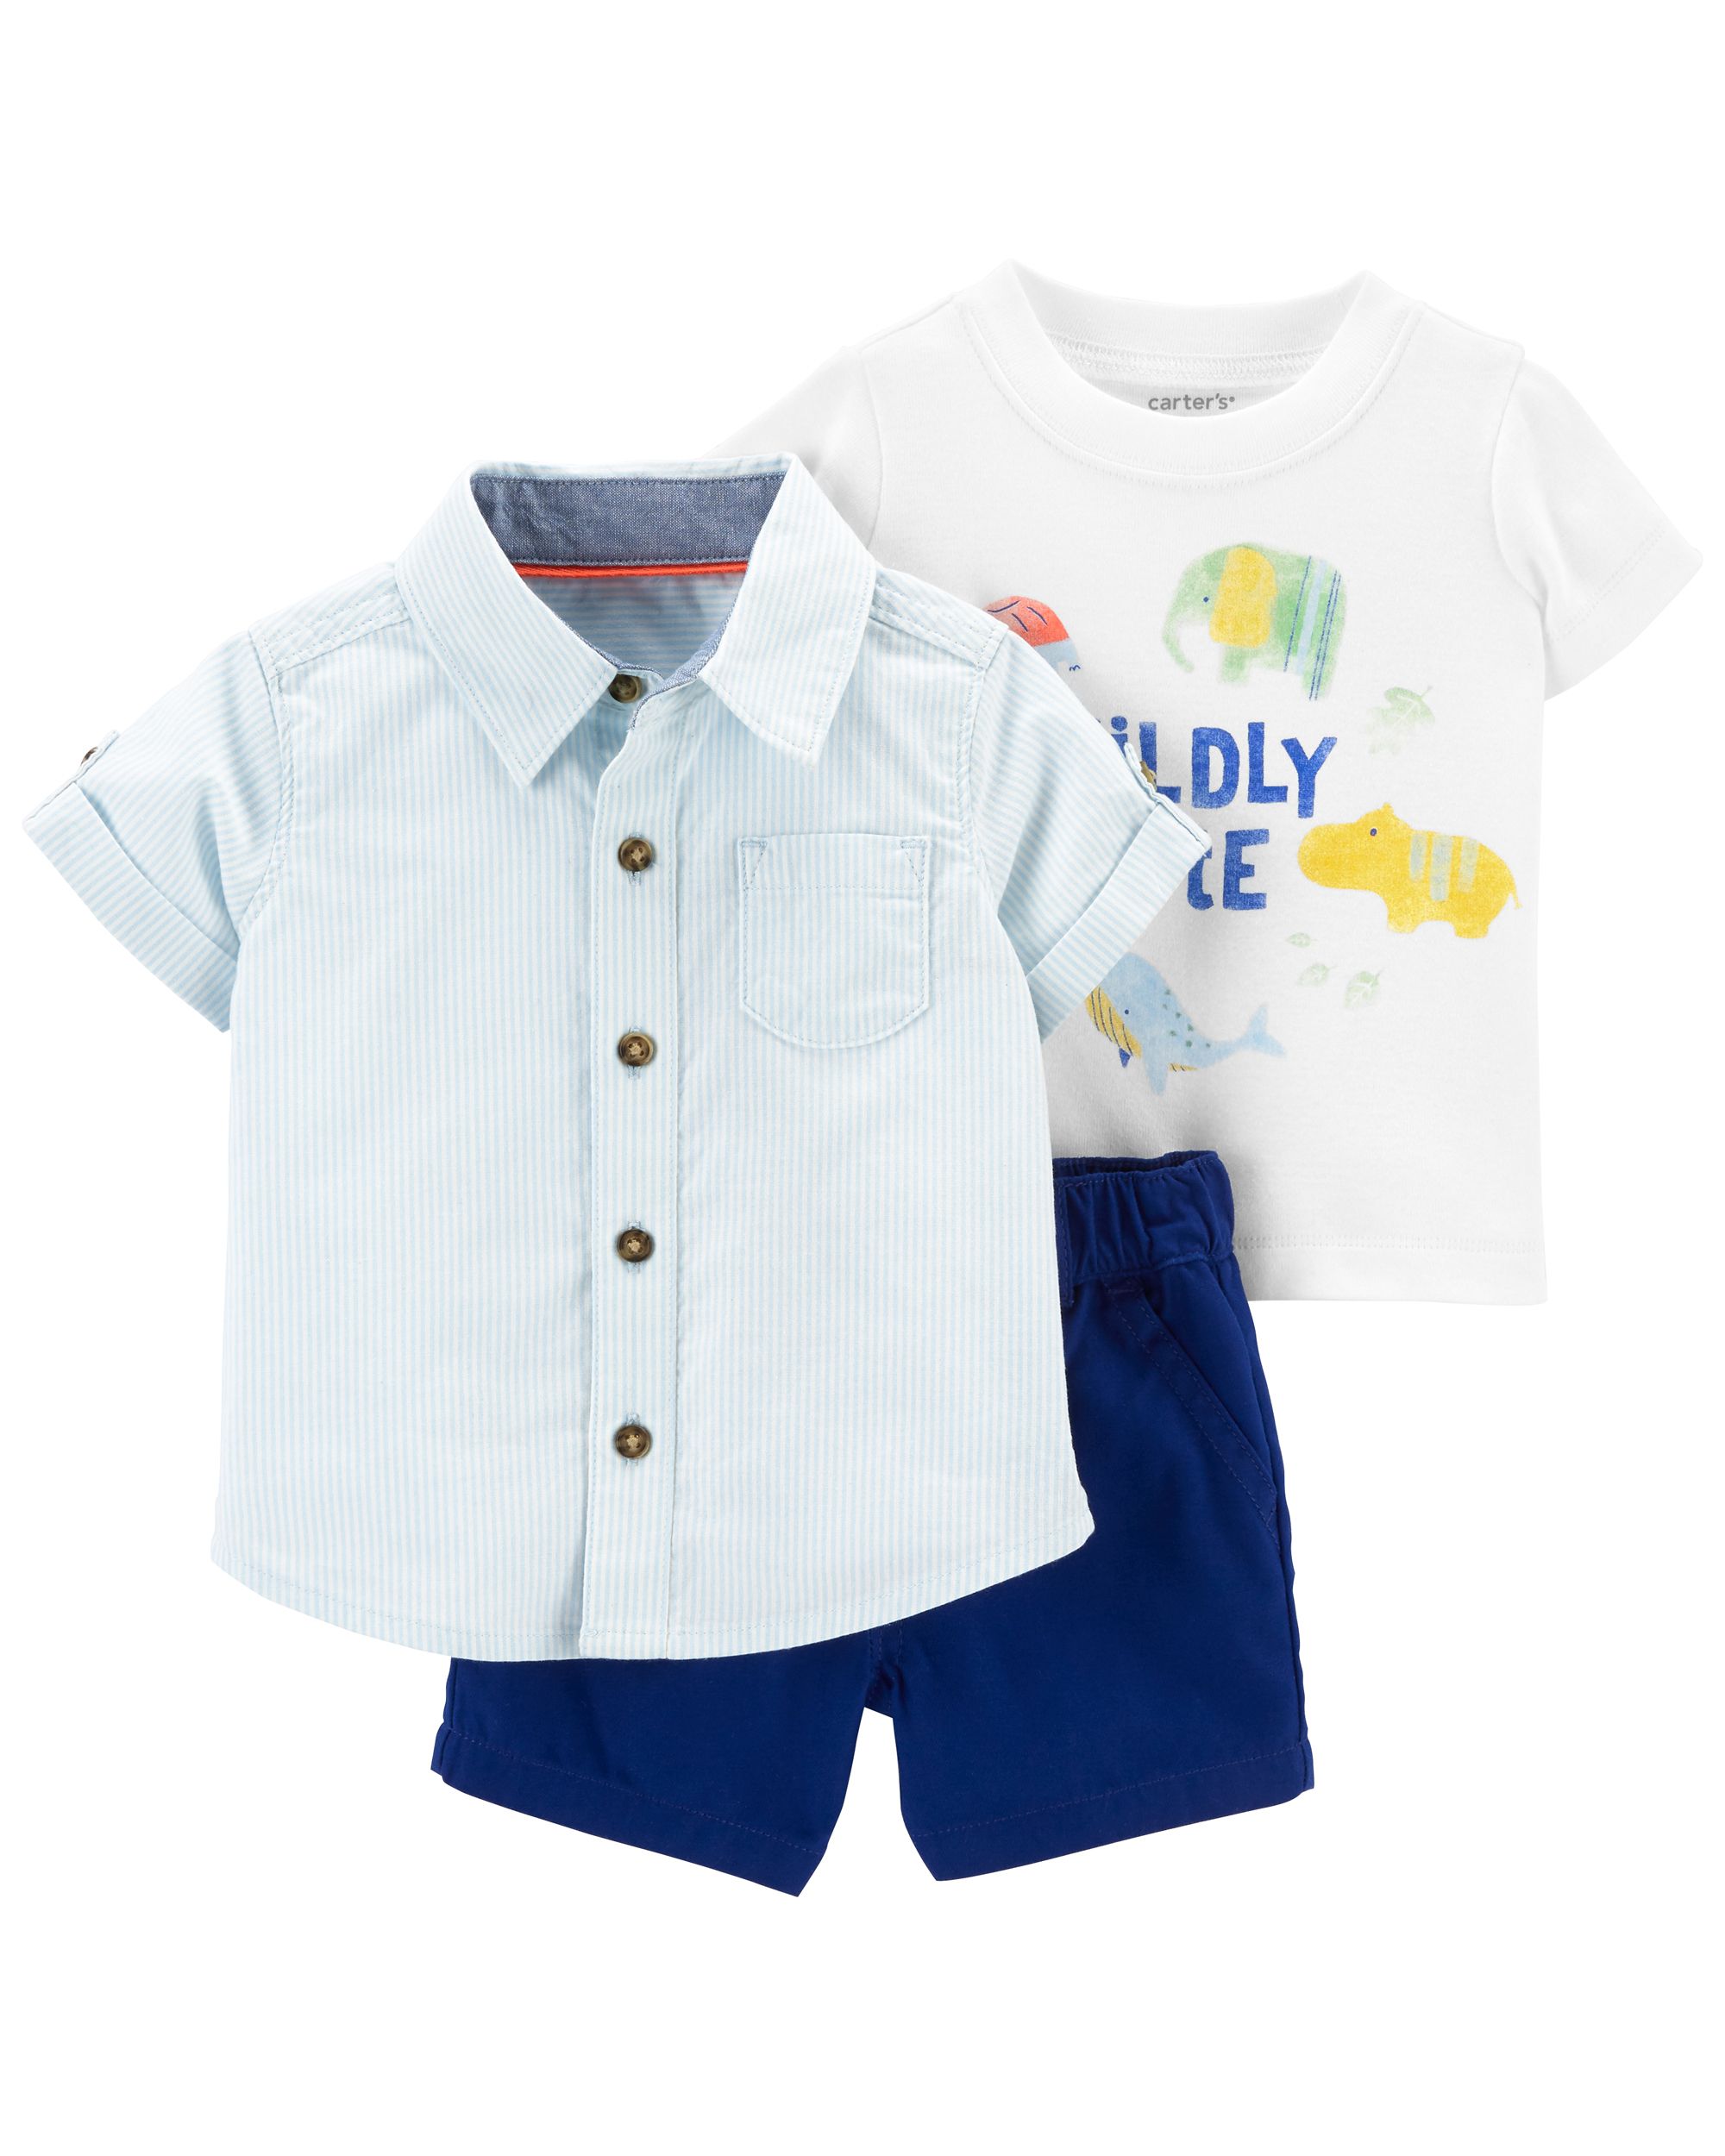 3-Piece Wildly Cute Outfit Set | Carter's